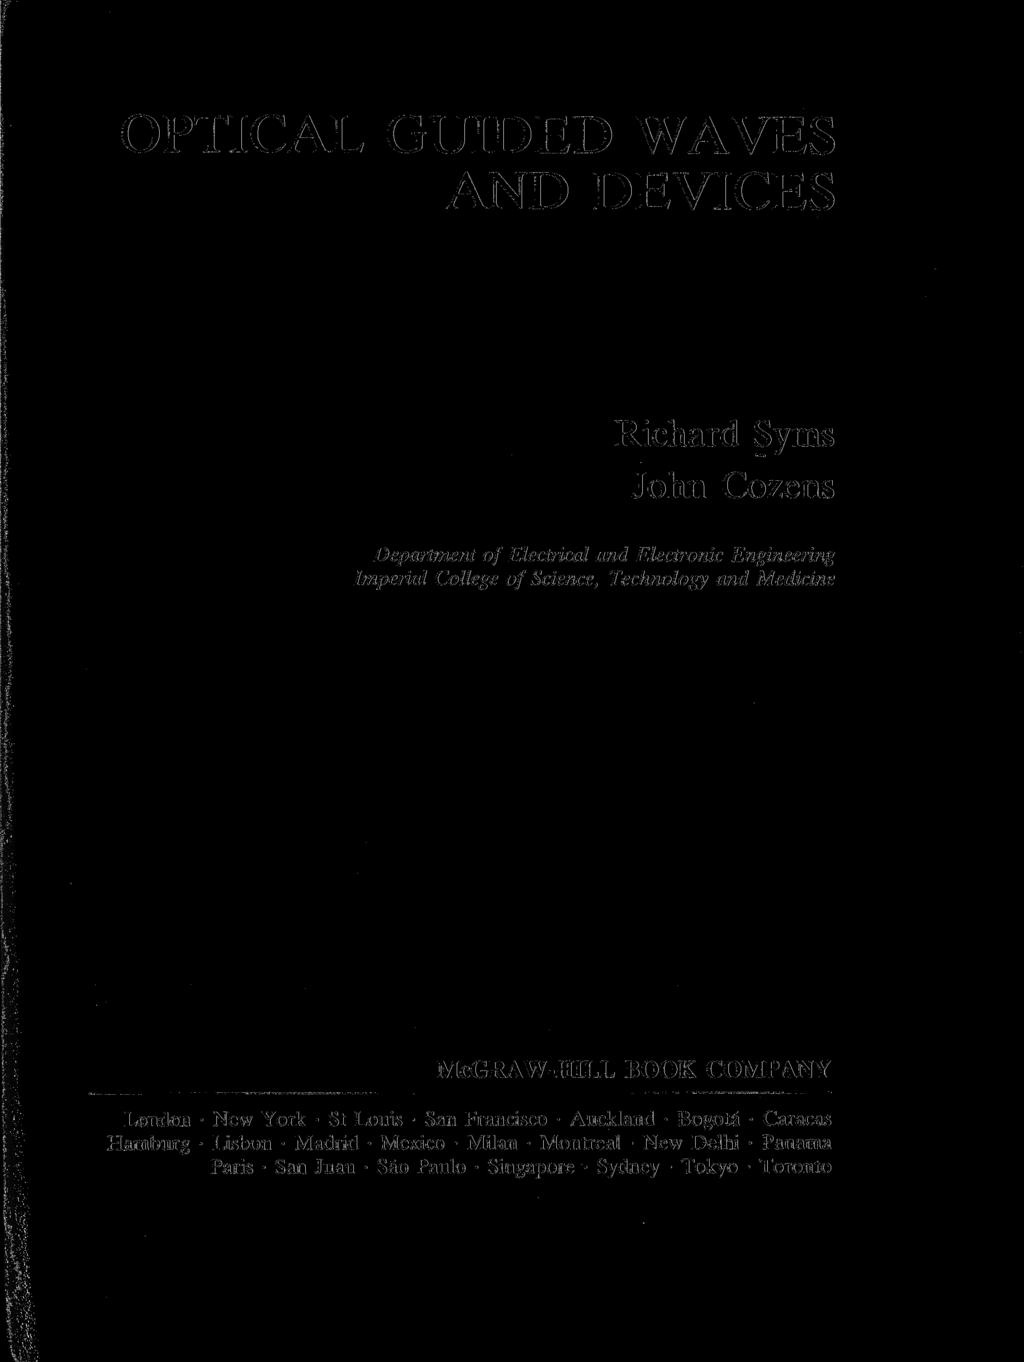 OPTICAL GUIDED WAVES AND DEVICES Richard Syms John Cozens Department of Electrical and Electronic Engineering Imperial College of Science, Technology and Medicine McGRAW-HILL BOOK